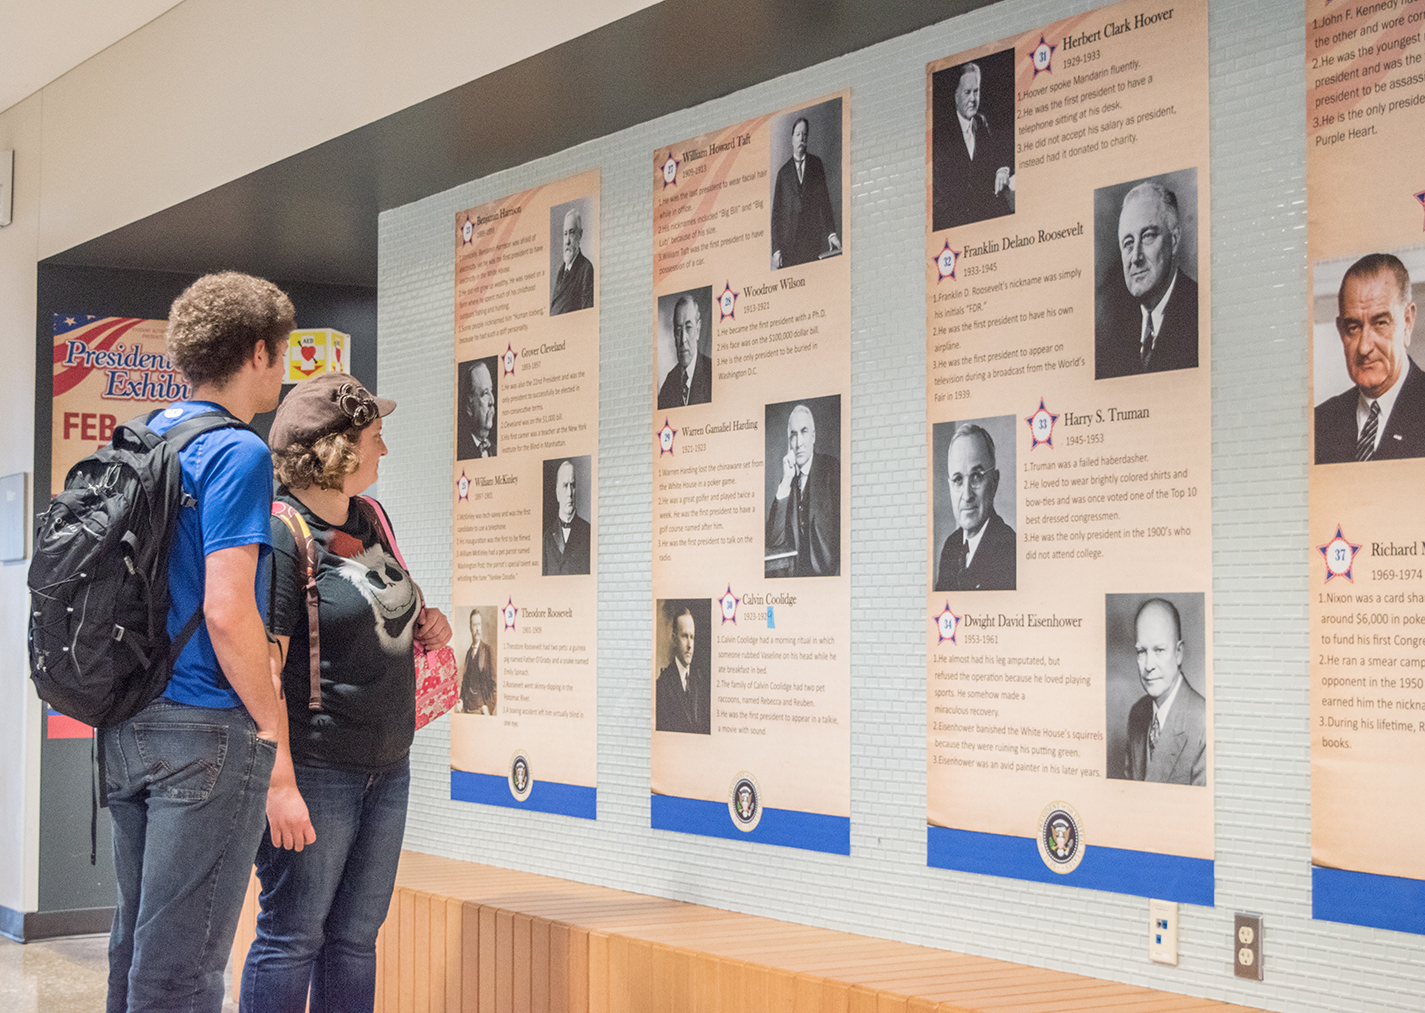 SE students Emily and Leon Nibarger take time to look at the Presidents Day exhibit on campus Feb. 20. The exhibit was SE’s way of celebrating the holiday.